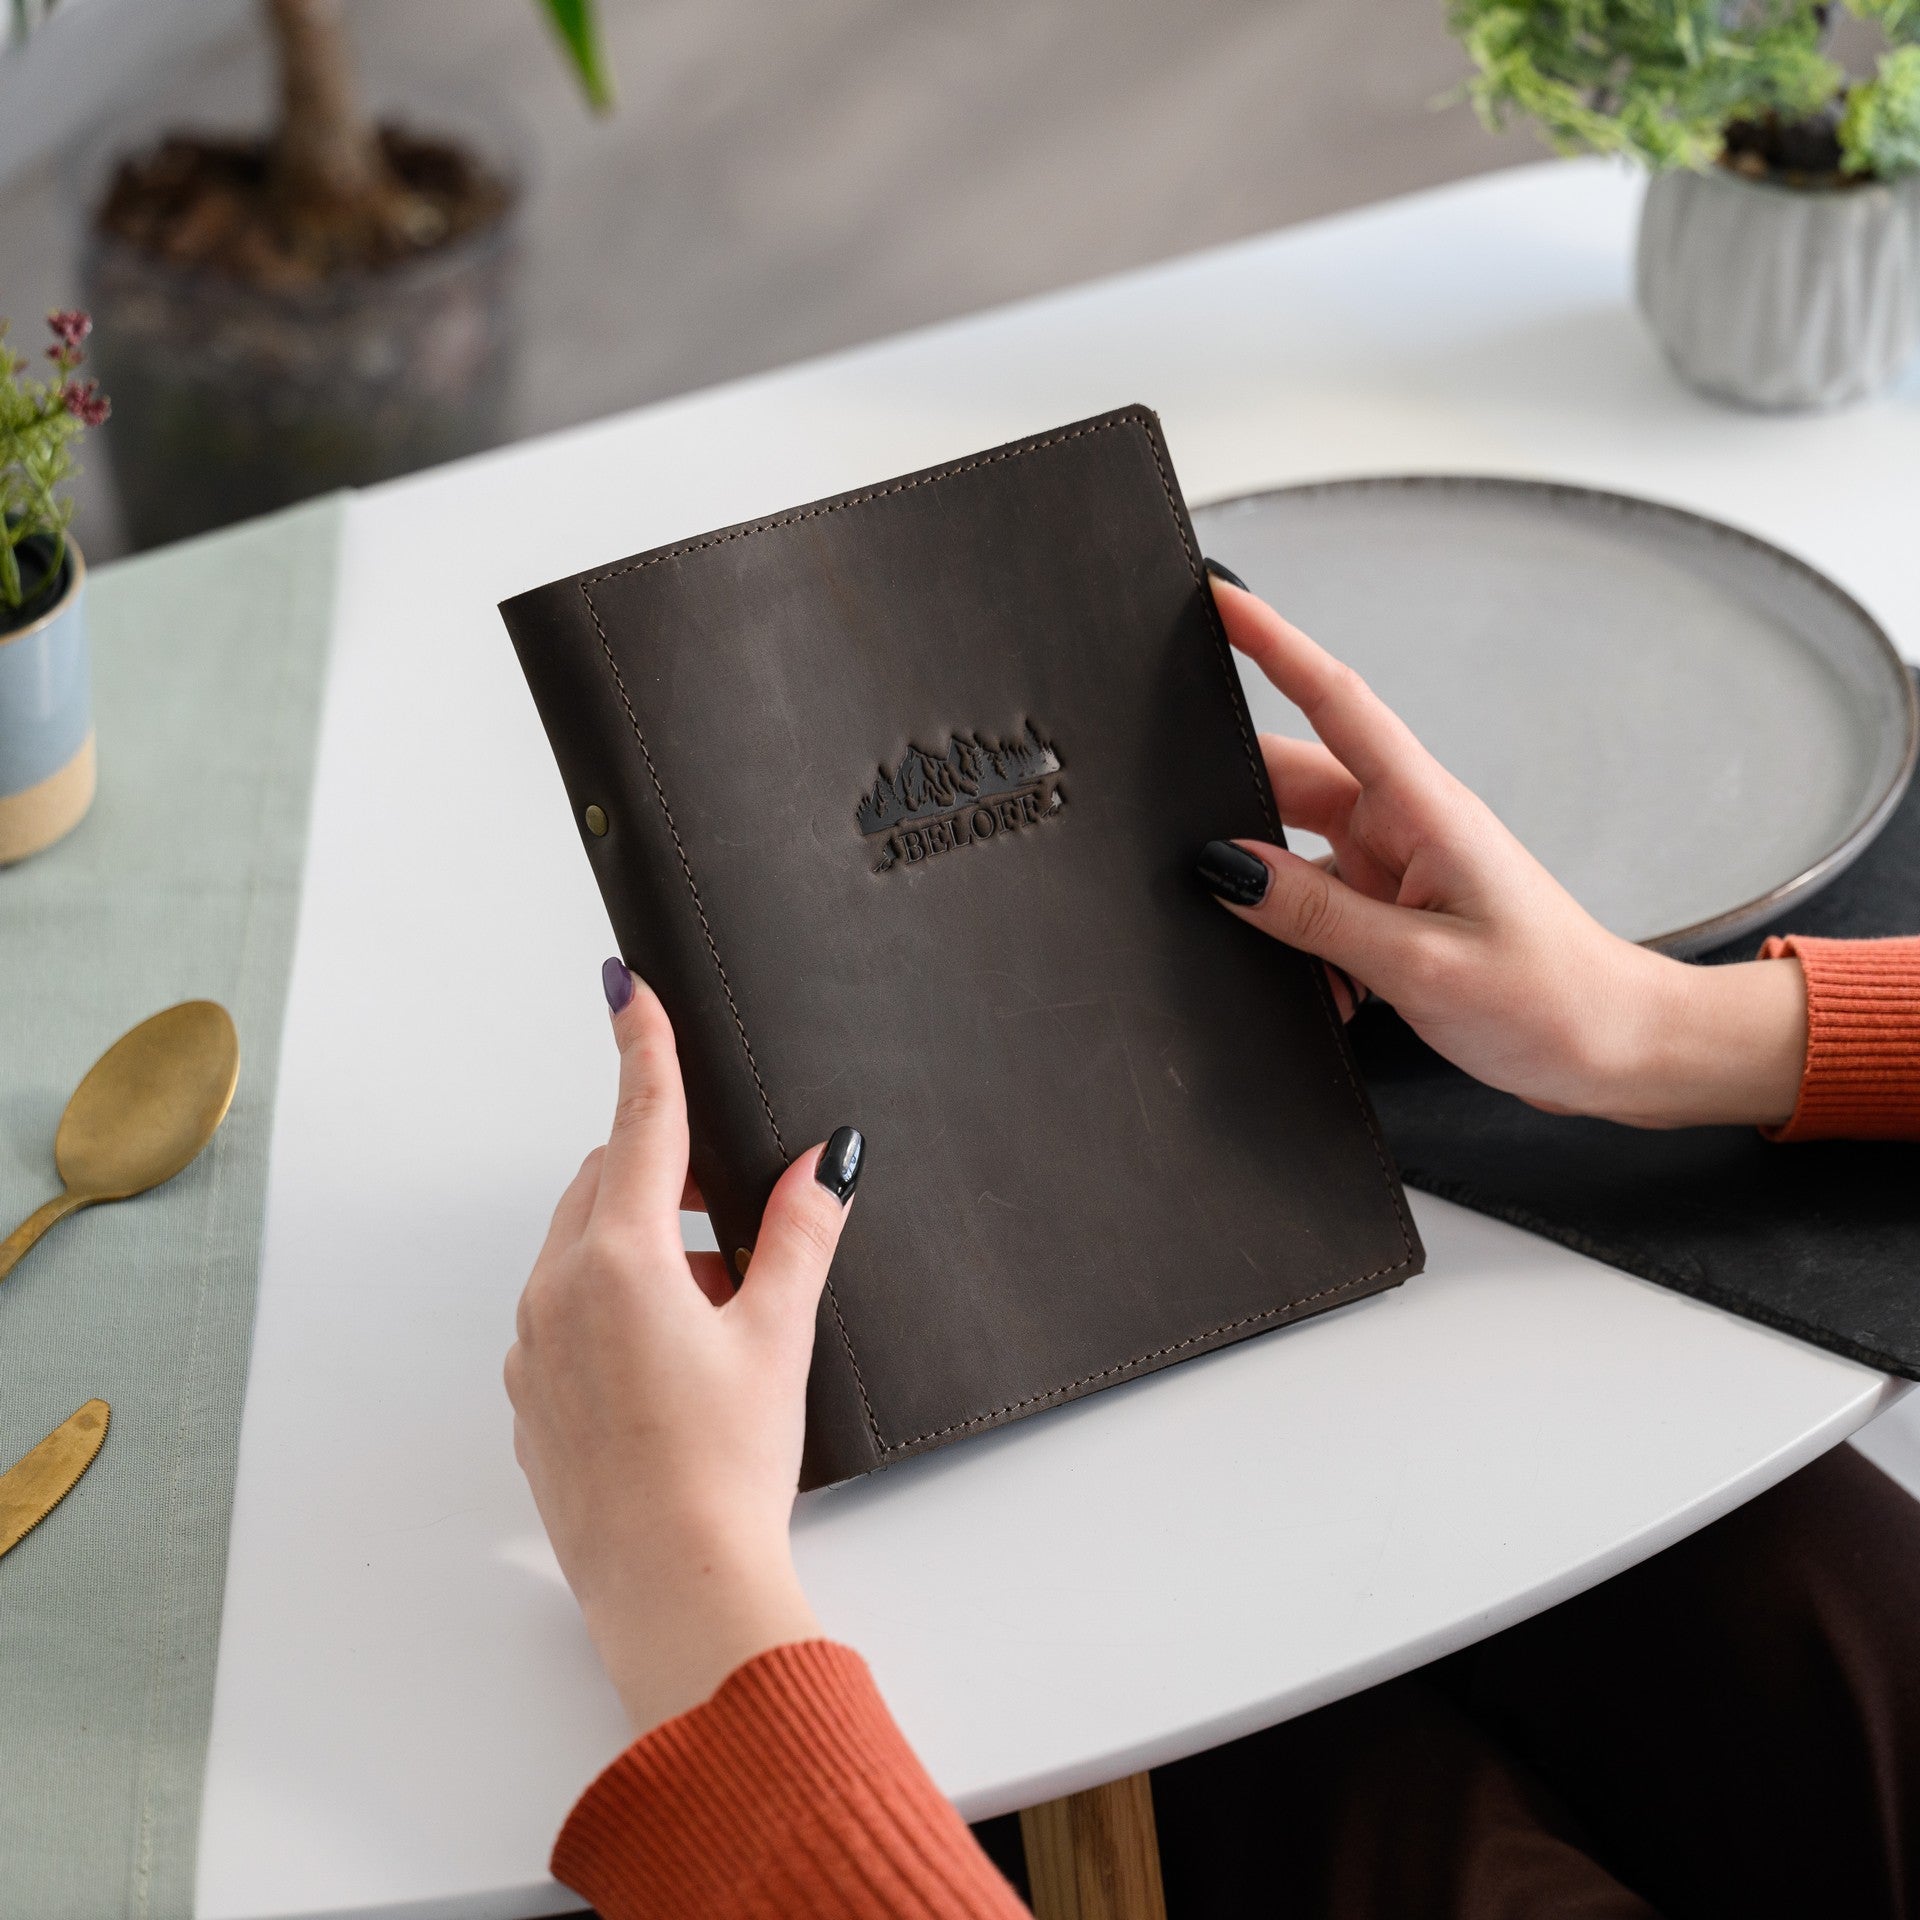 Impress patrons with our handcrafted menu featuring logo embossing, reflecting your restaurant's unique identity.